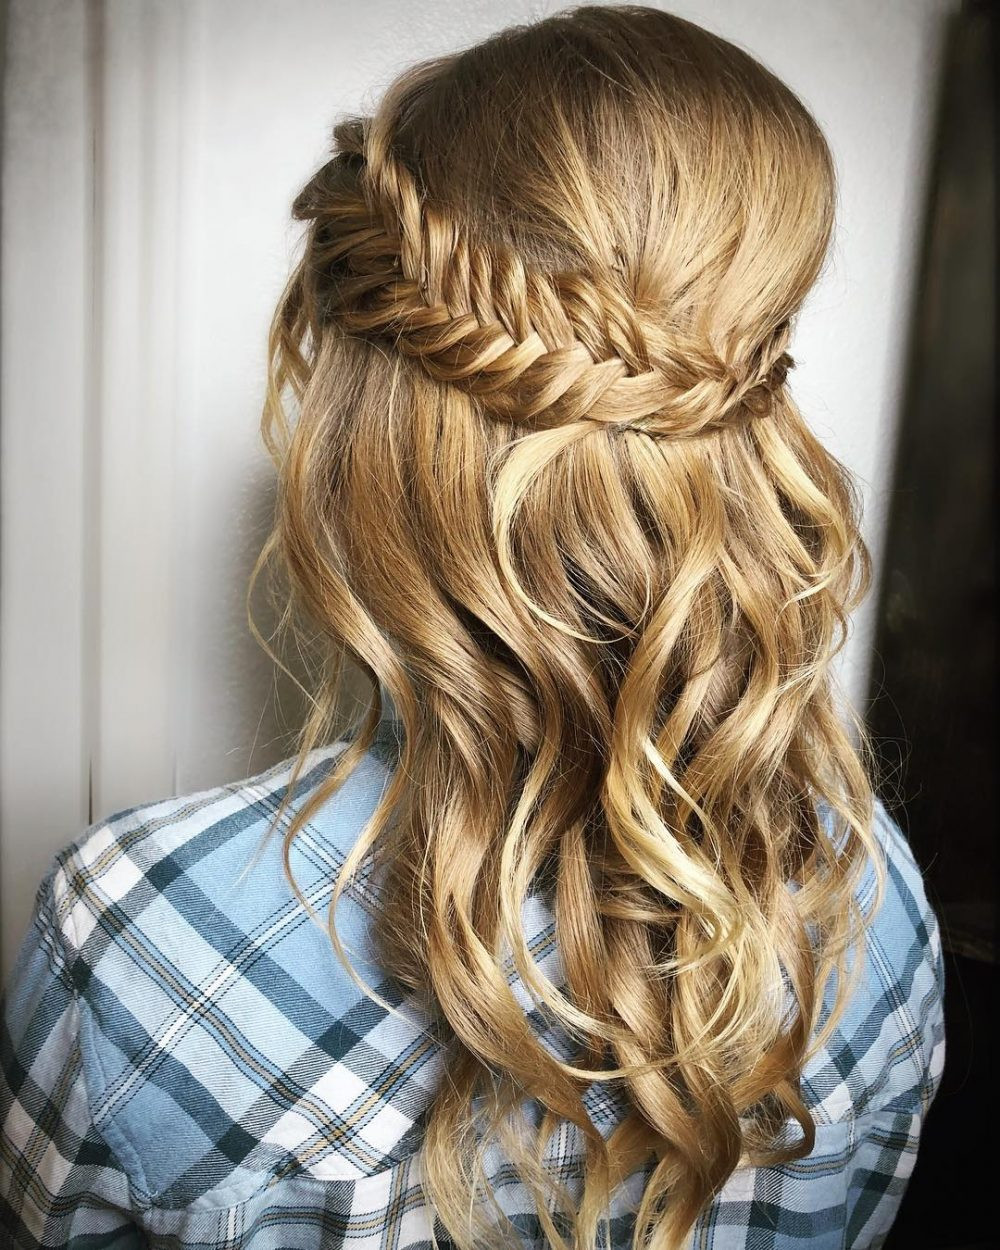 Prom Hairstyle Half Updo
 27 Prettiest Half Up Half Down Prom Hairstyles for 2019